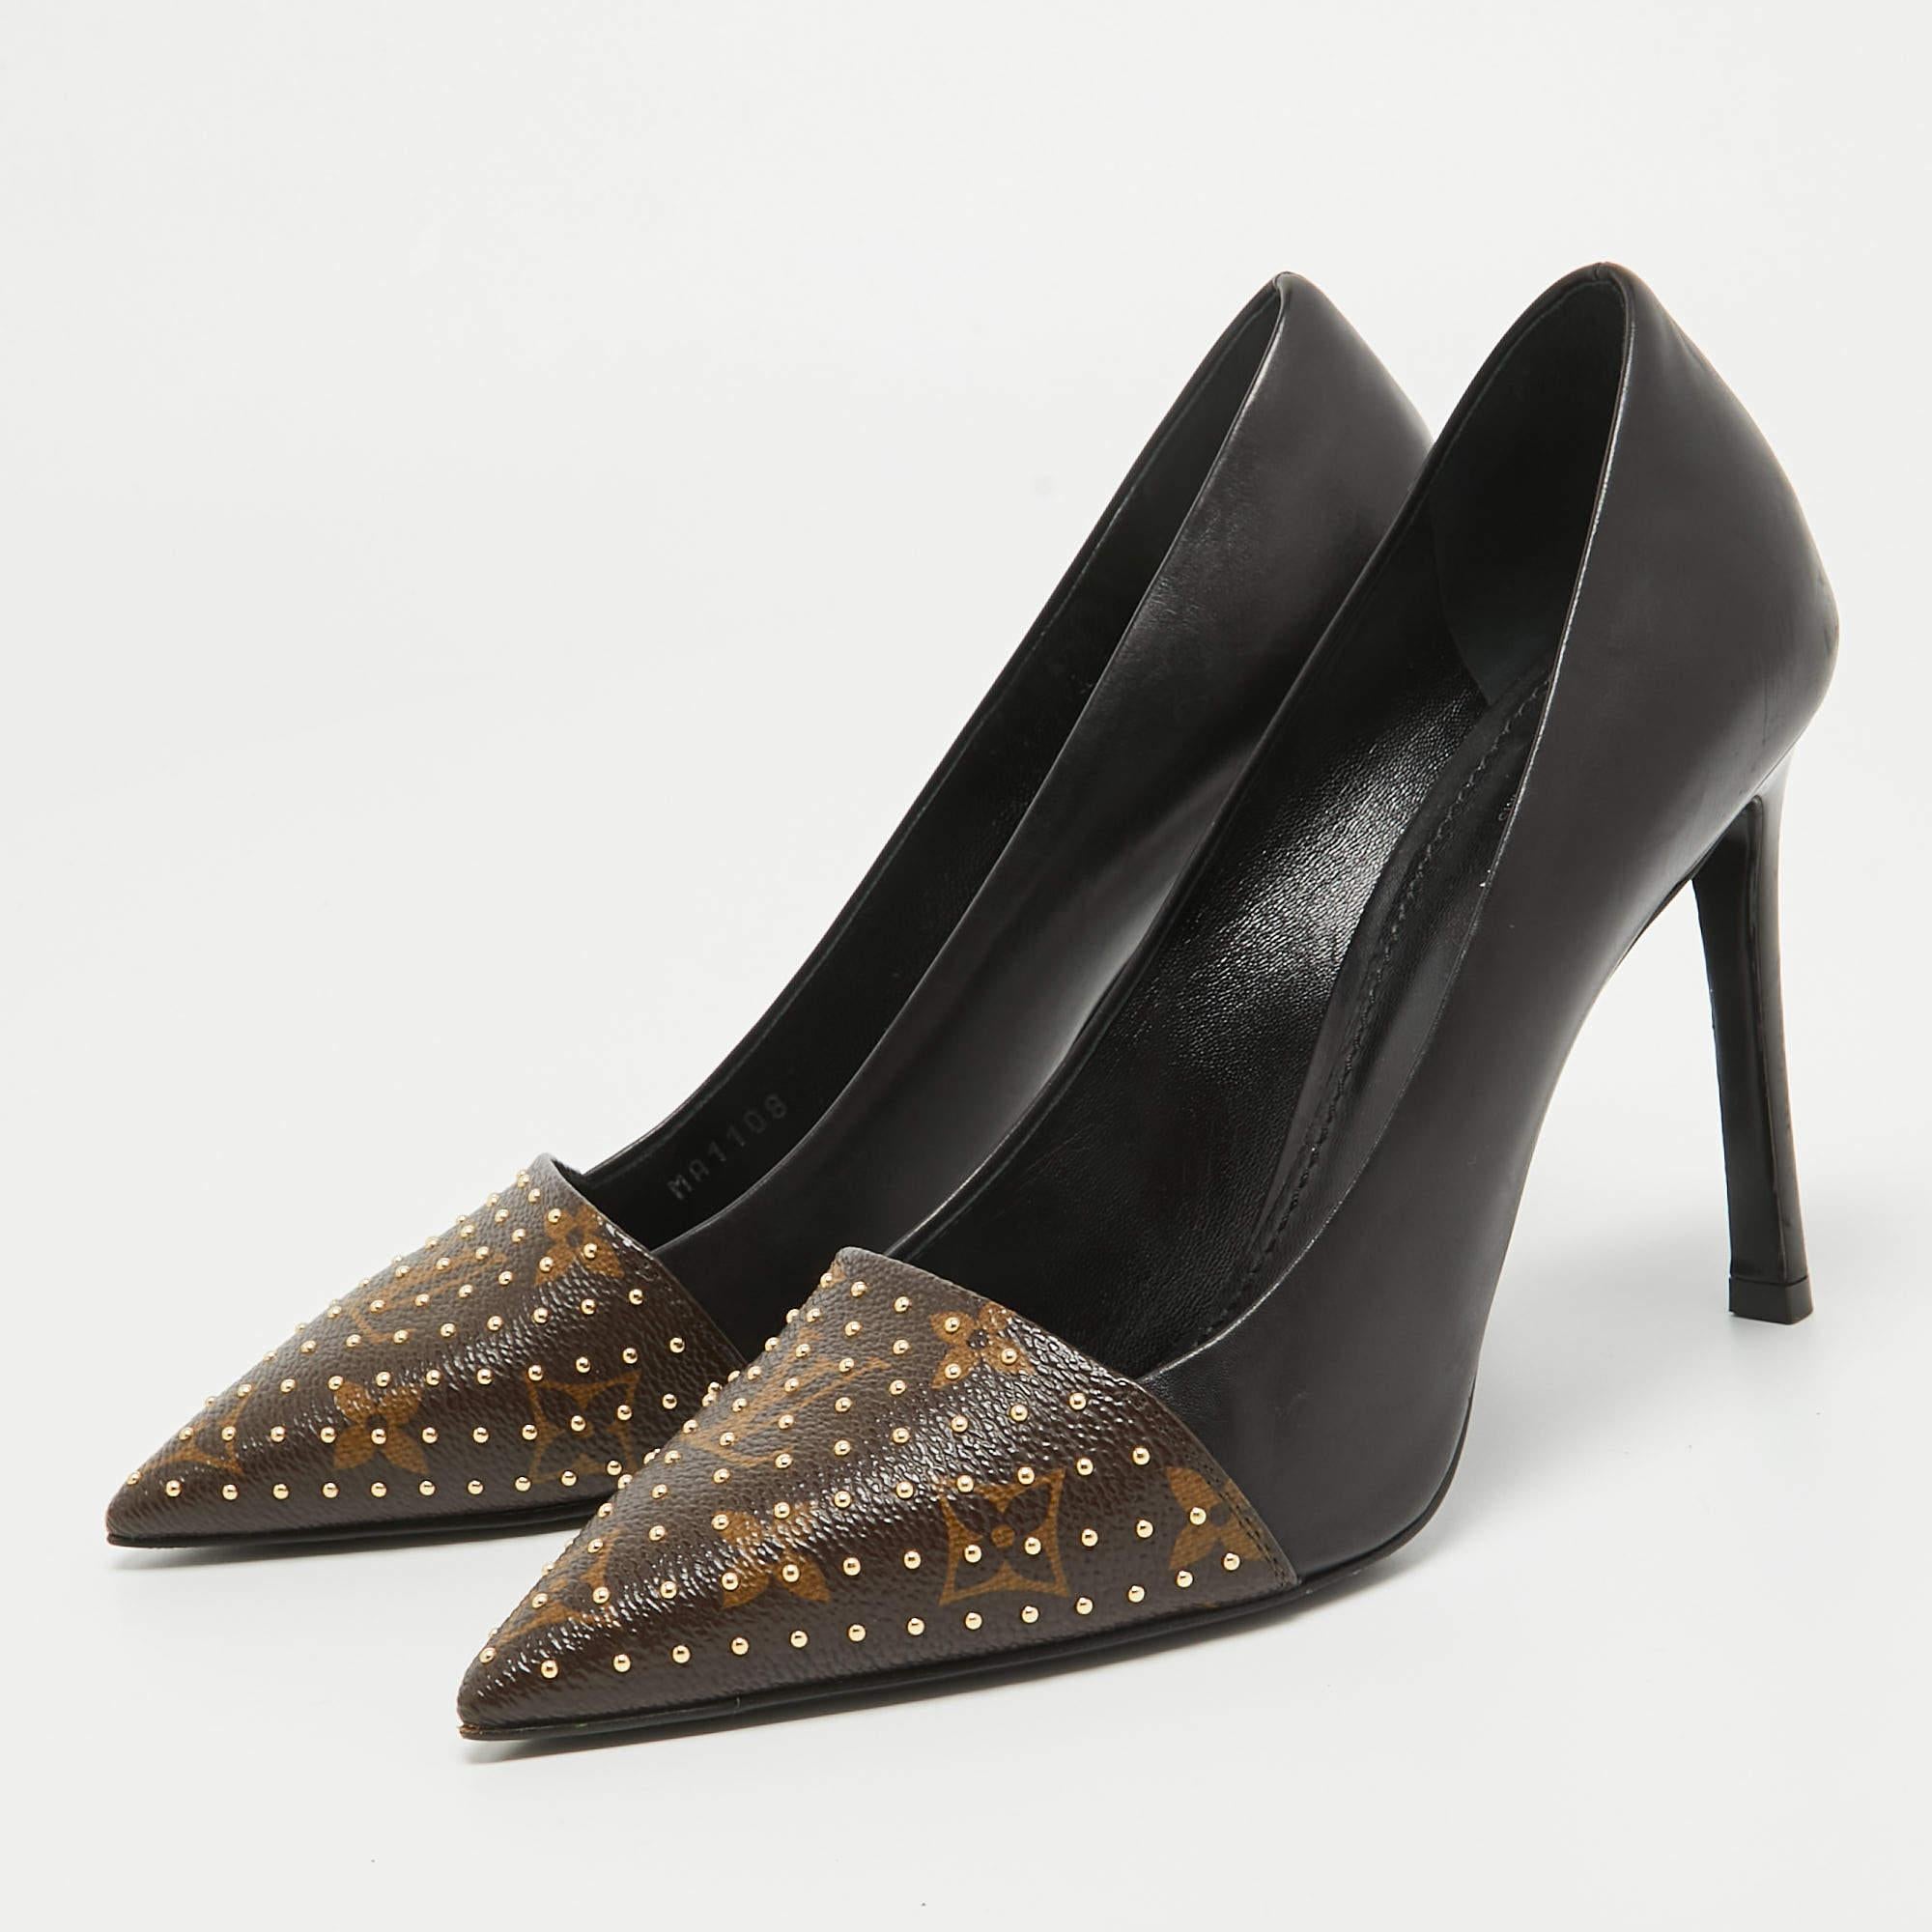 Exhibit an elegant style with this pair of pumps. These Louis Vuitton shoes for women are crafted from quality materials. They are set on durable soles and sleek heels.

